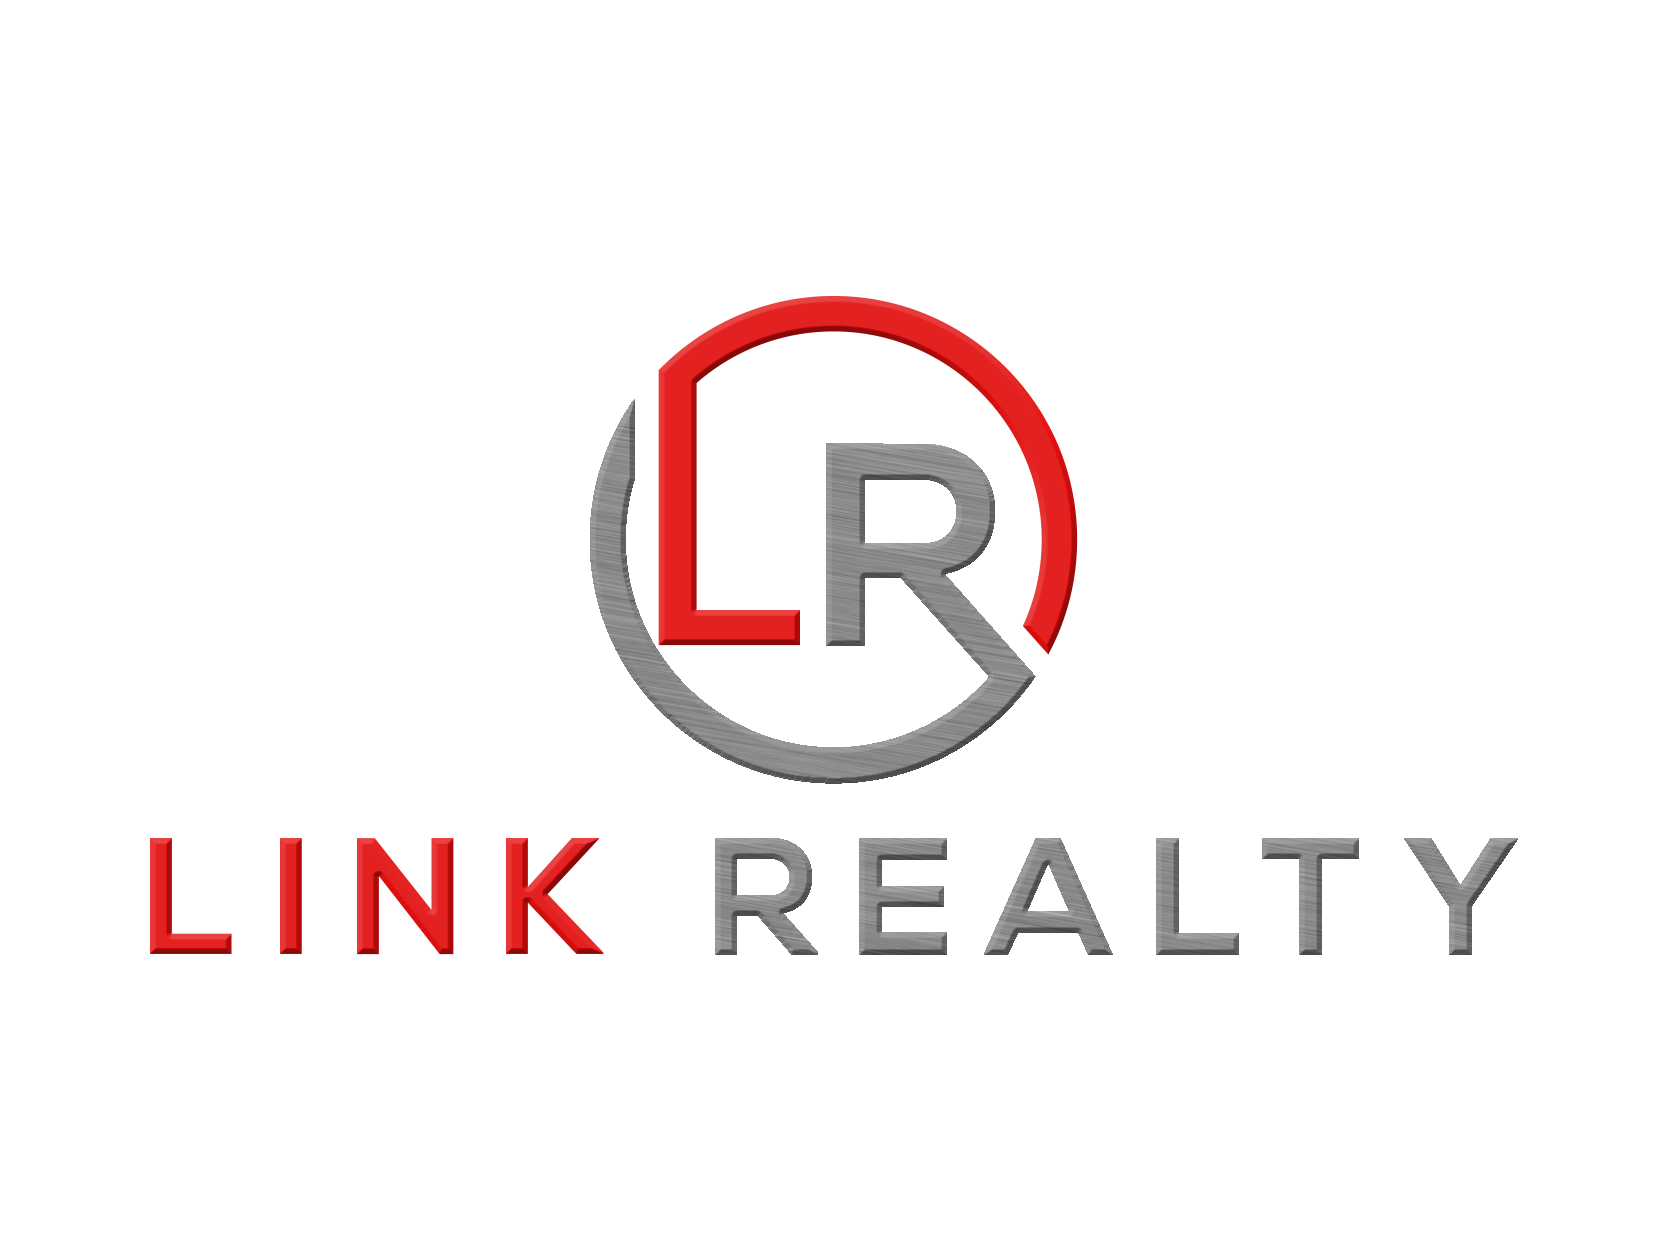 Link Realty